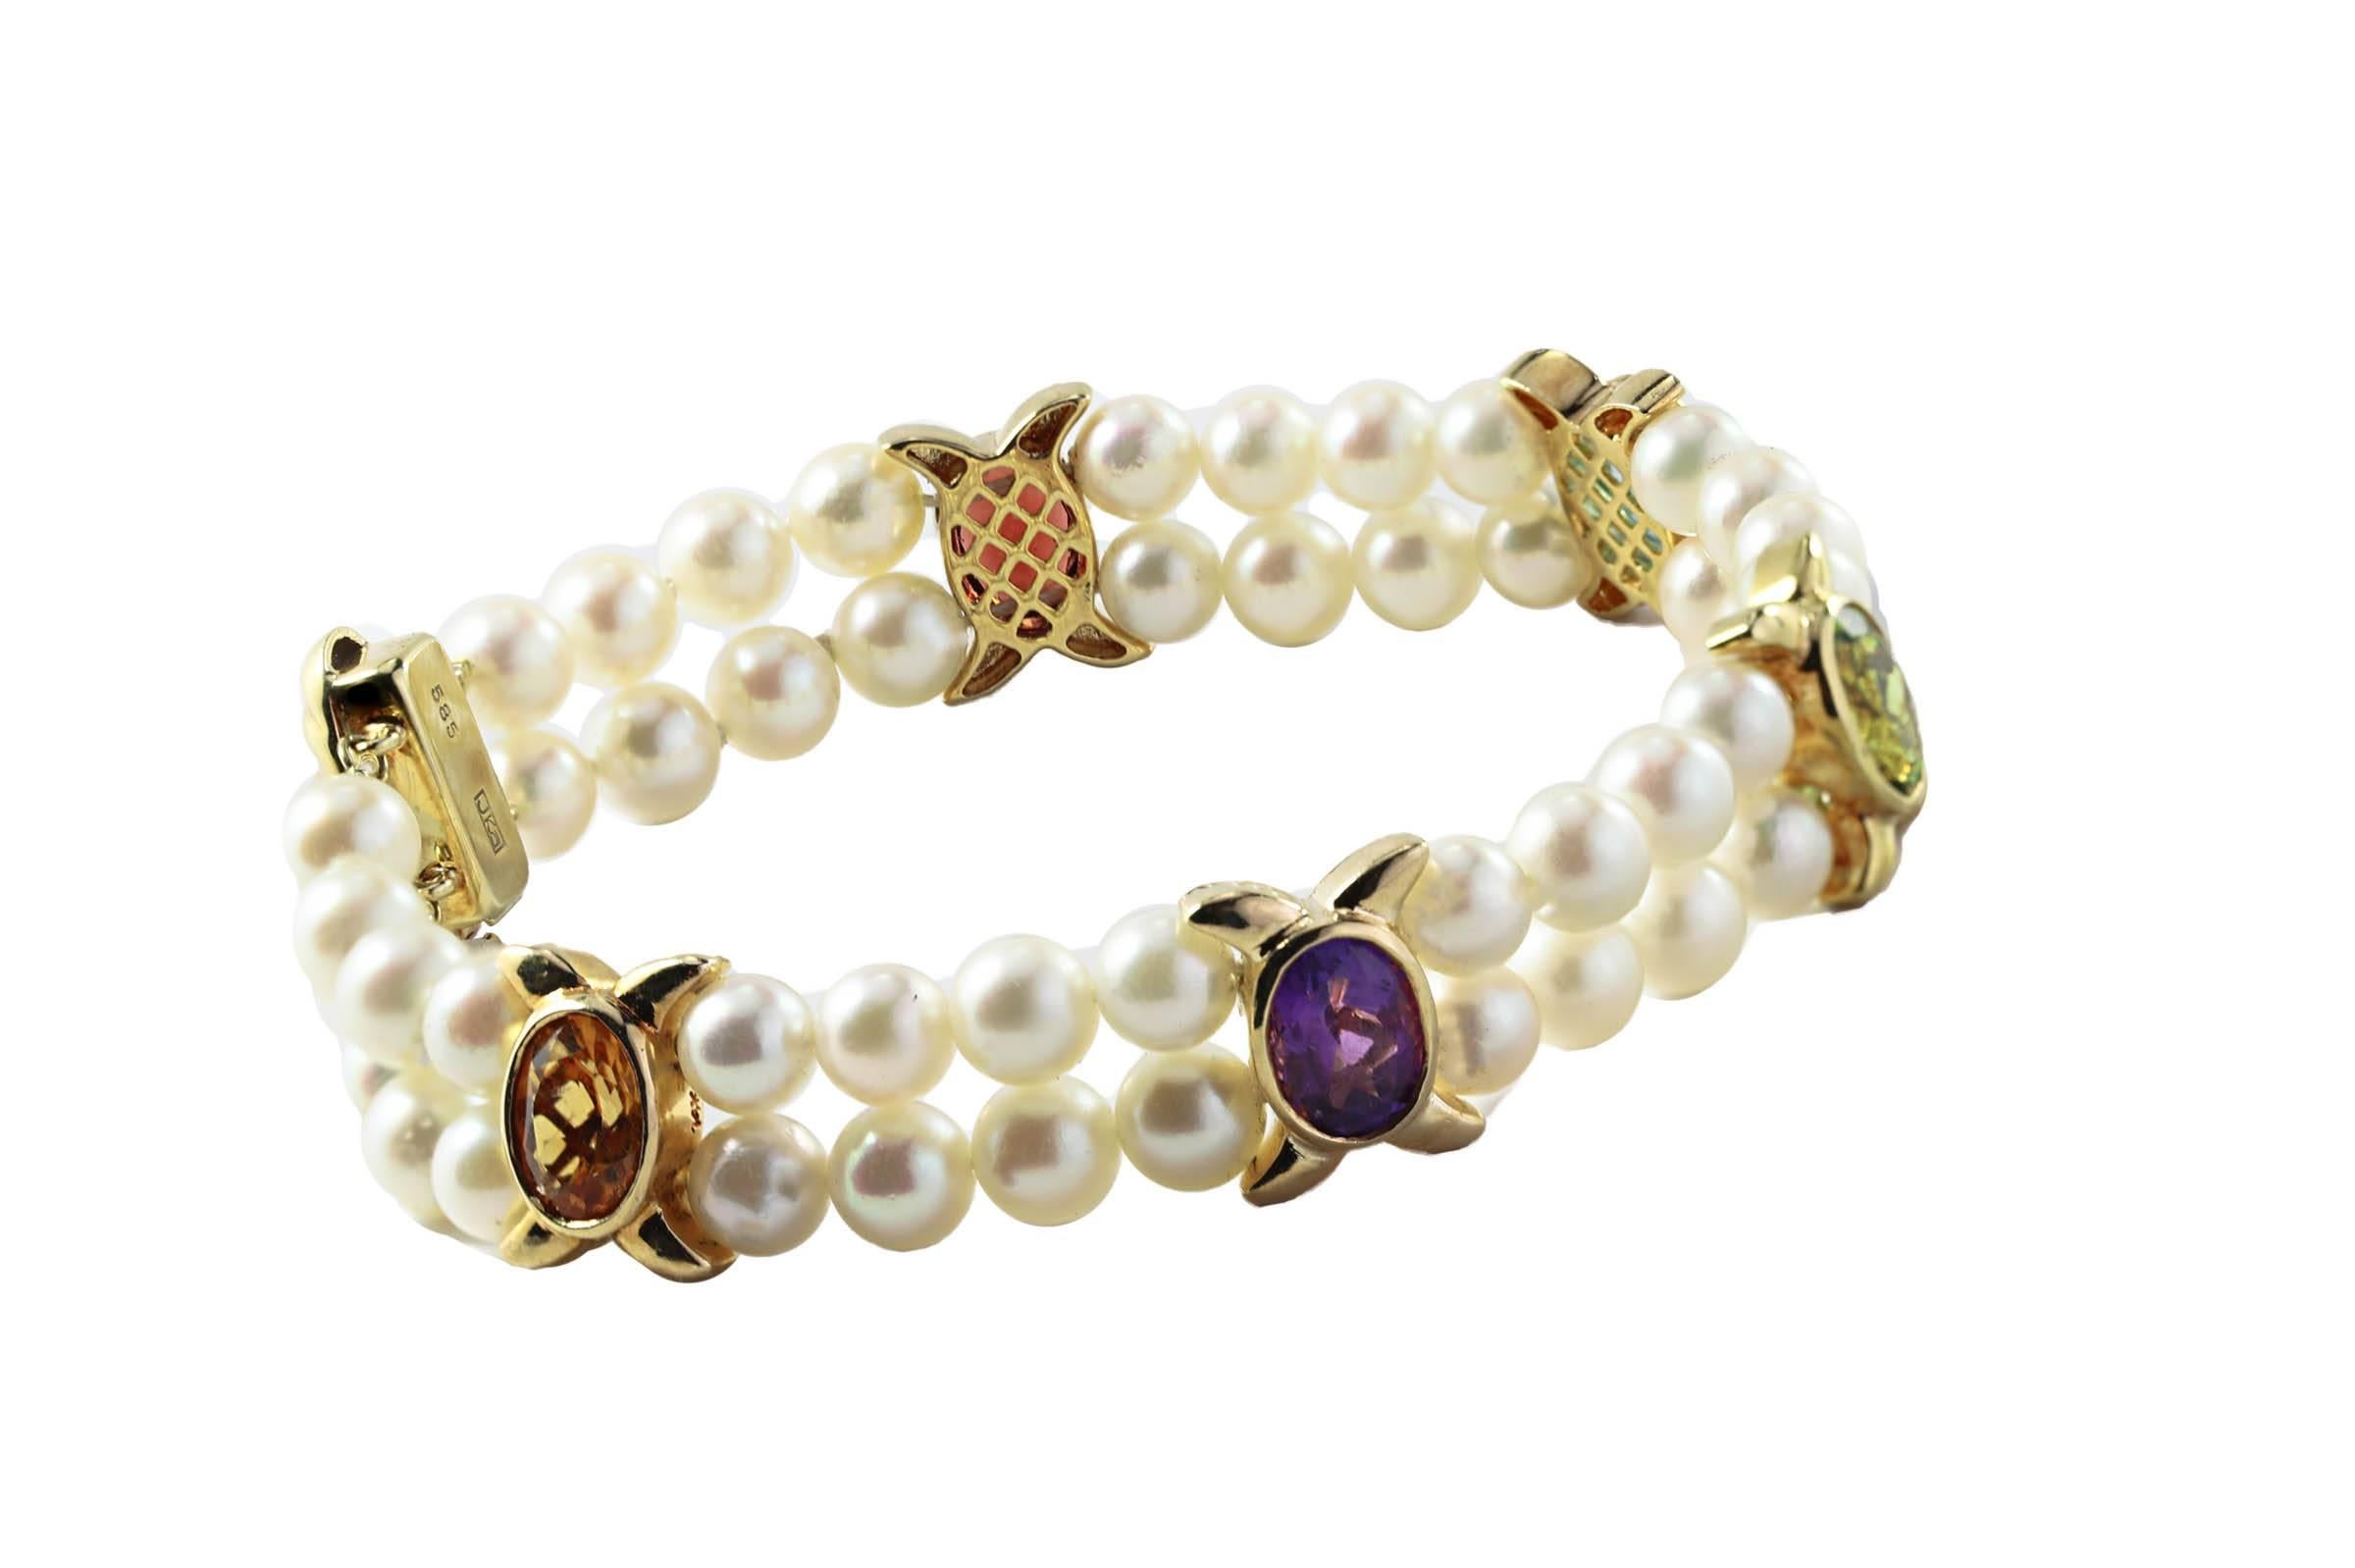 14K yellow gold double strand bracelet with 5mm cultured pearl and bezel set semi-precious stones with diamonds in the clasp.

